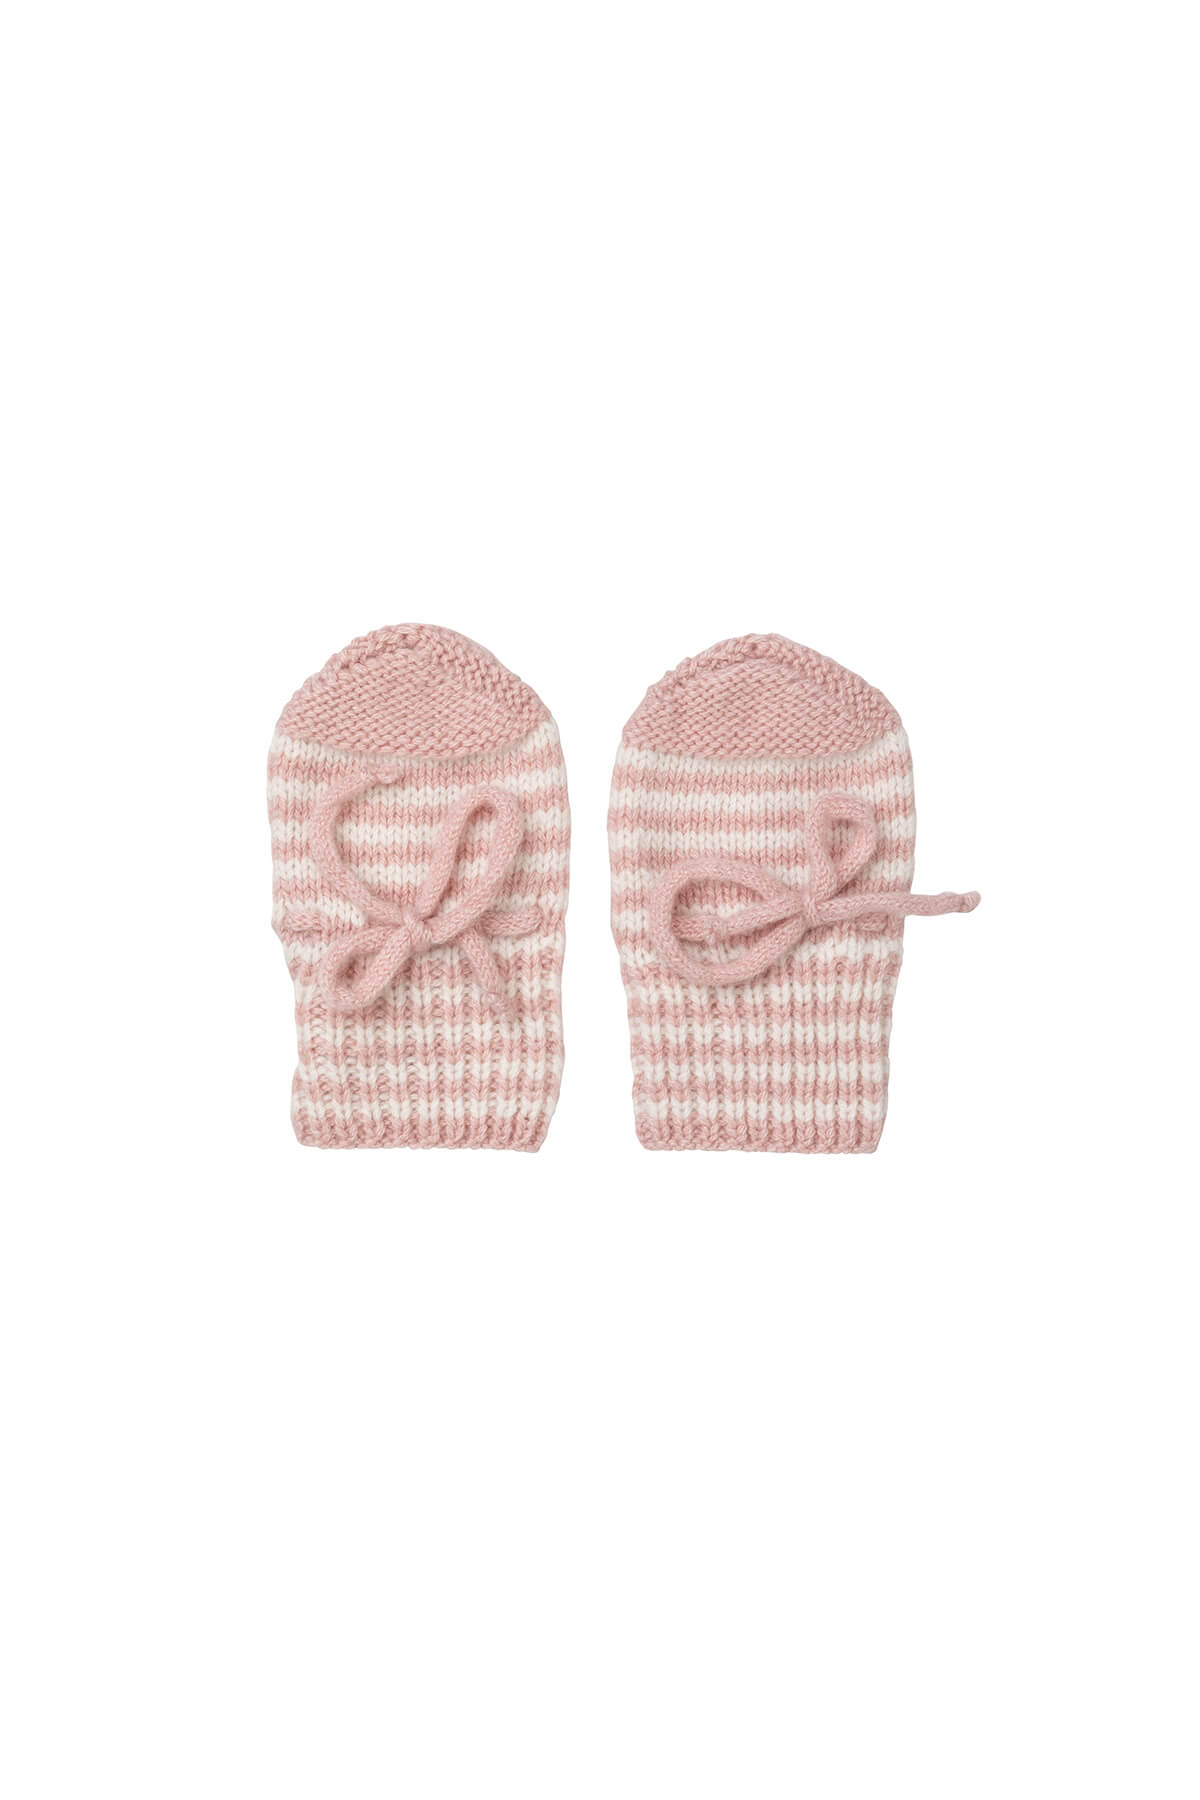 Johnstons of Elgin Hand Knitted Stripe Cashmere Baby Mittens in Orchid & White on white background 746343340